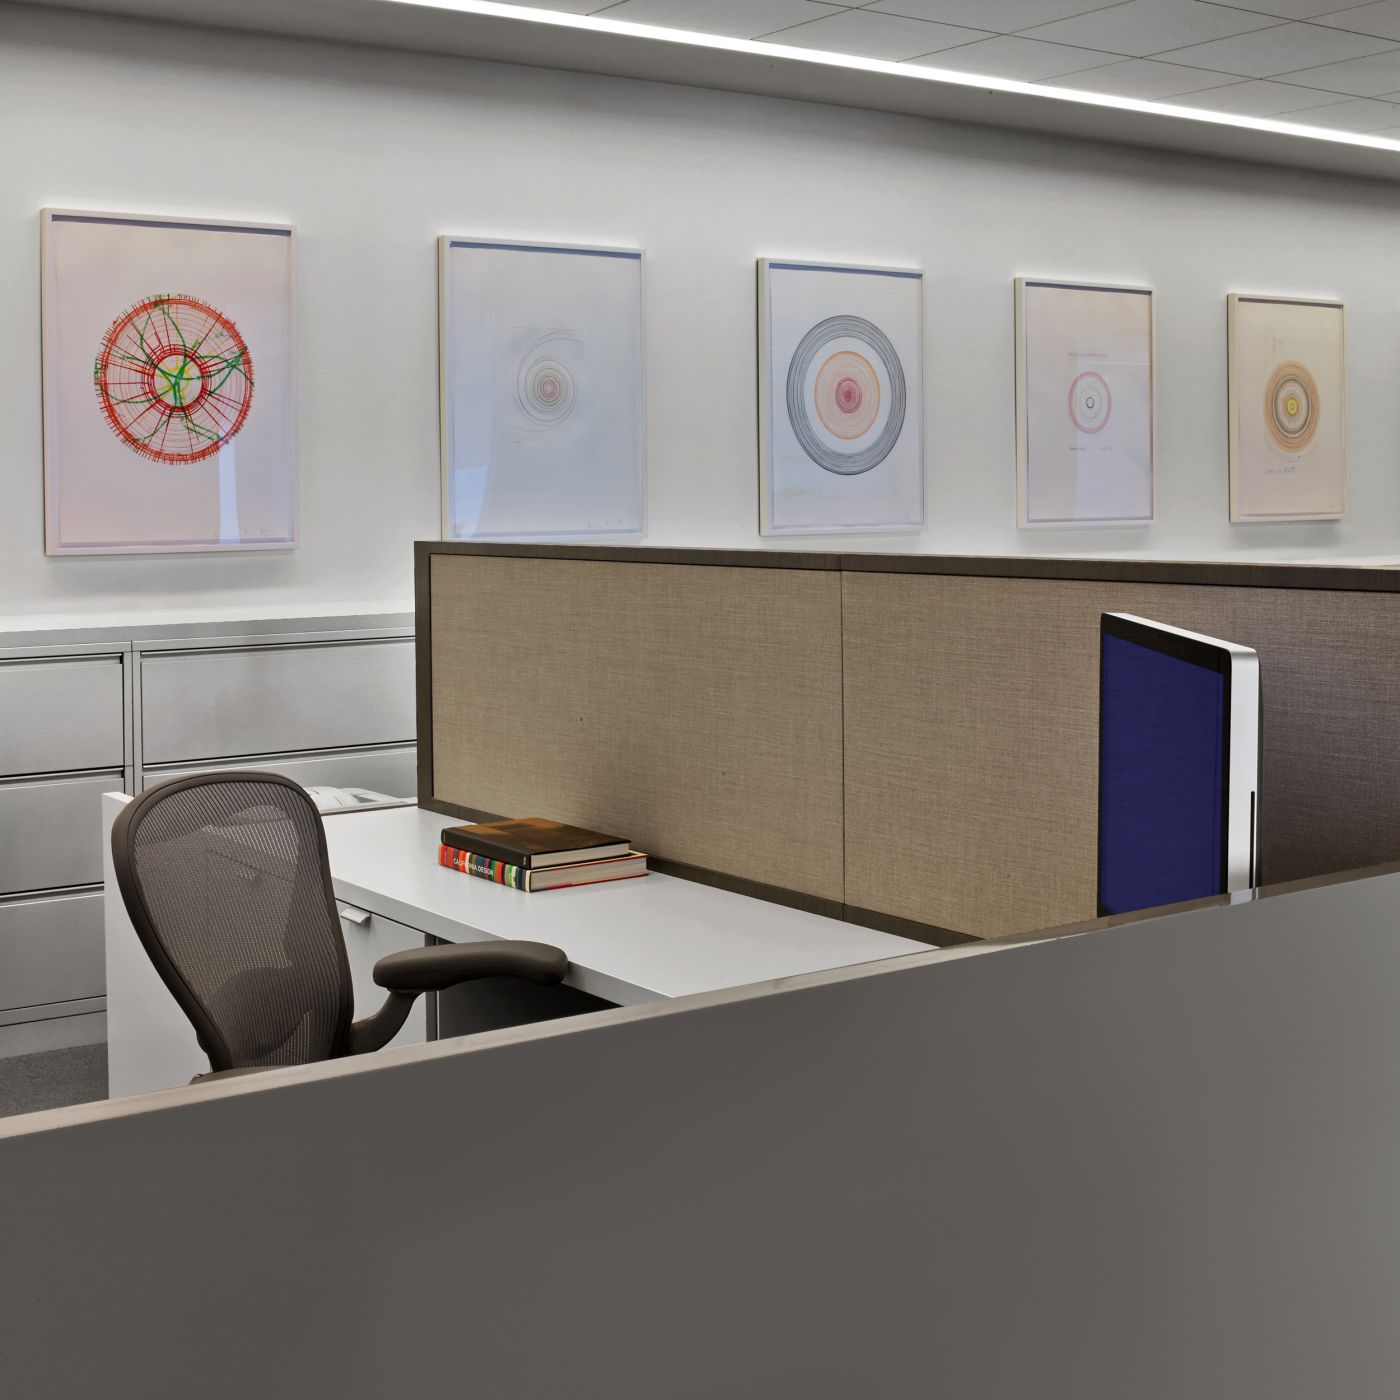 Open plan workstations feature white laminate and casework resulting in a beautiful, clean, and modern aesthetic.